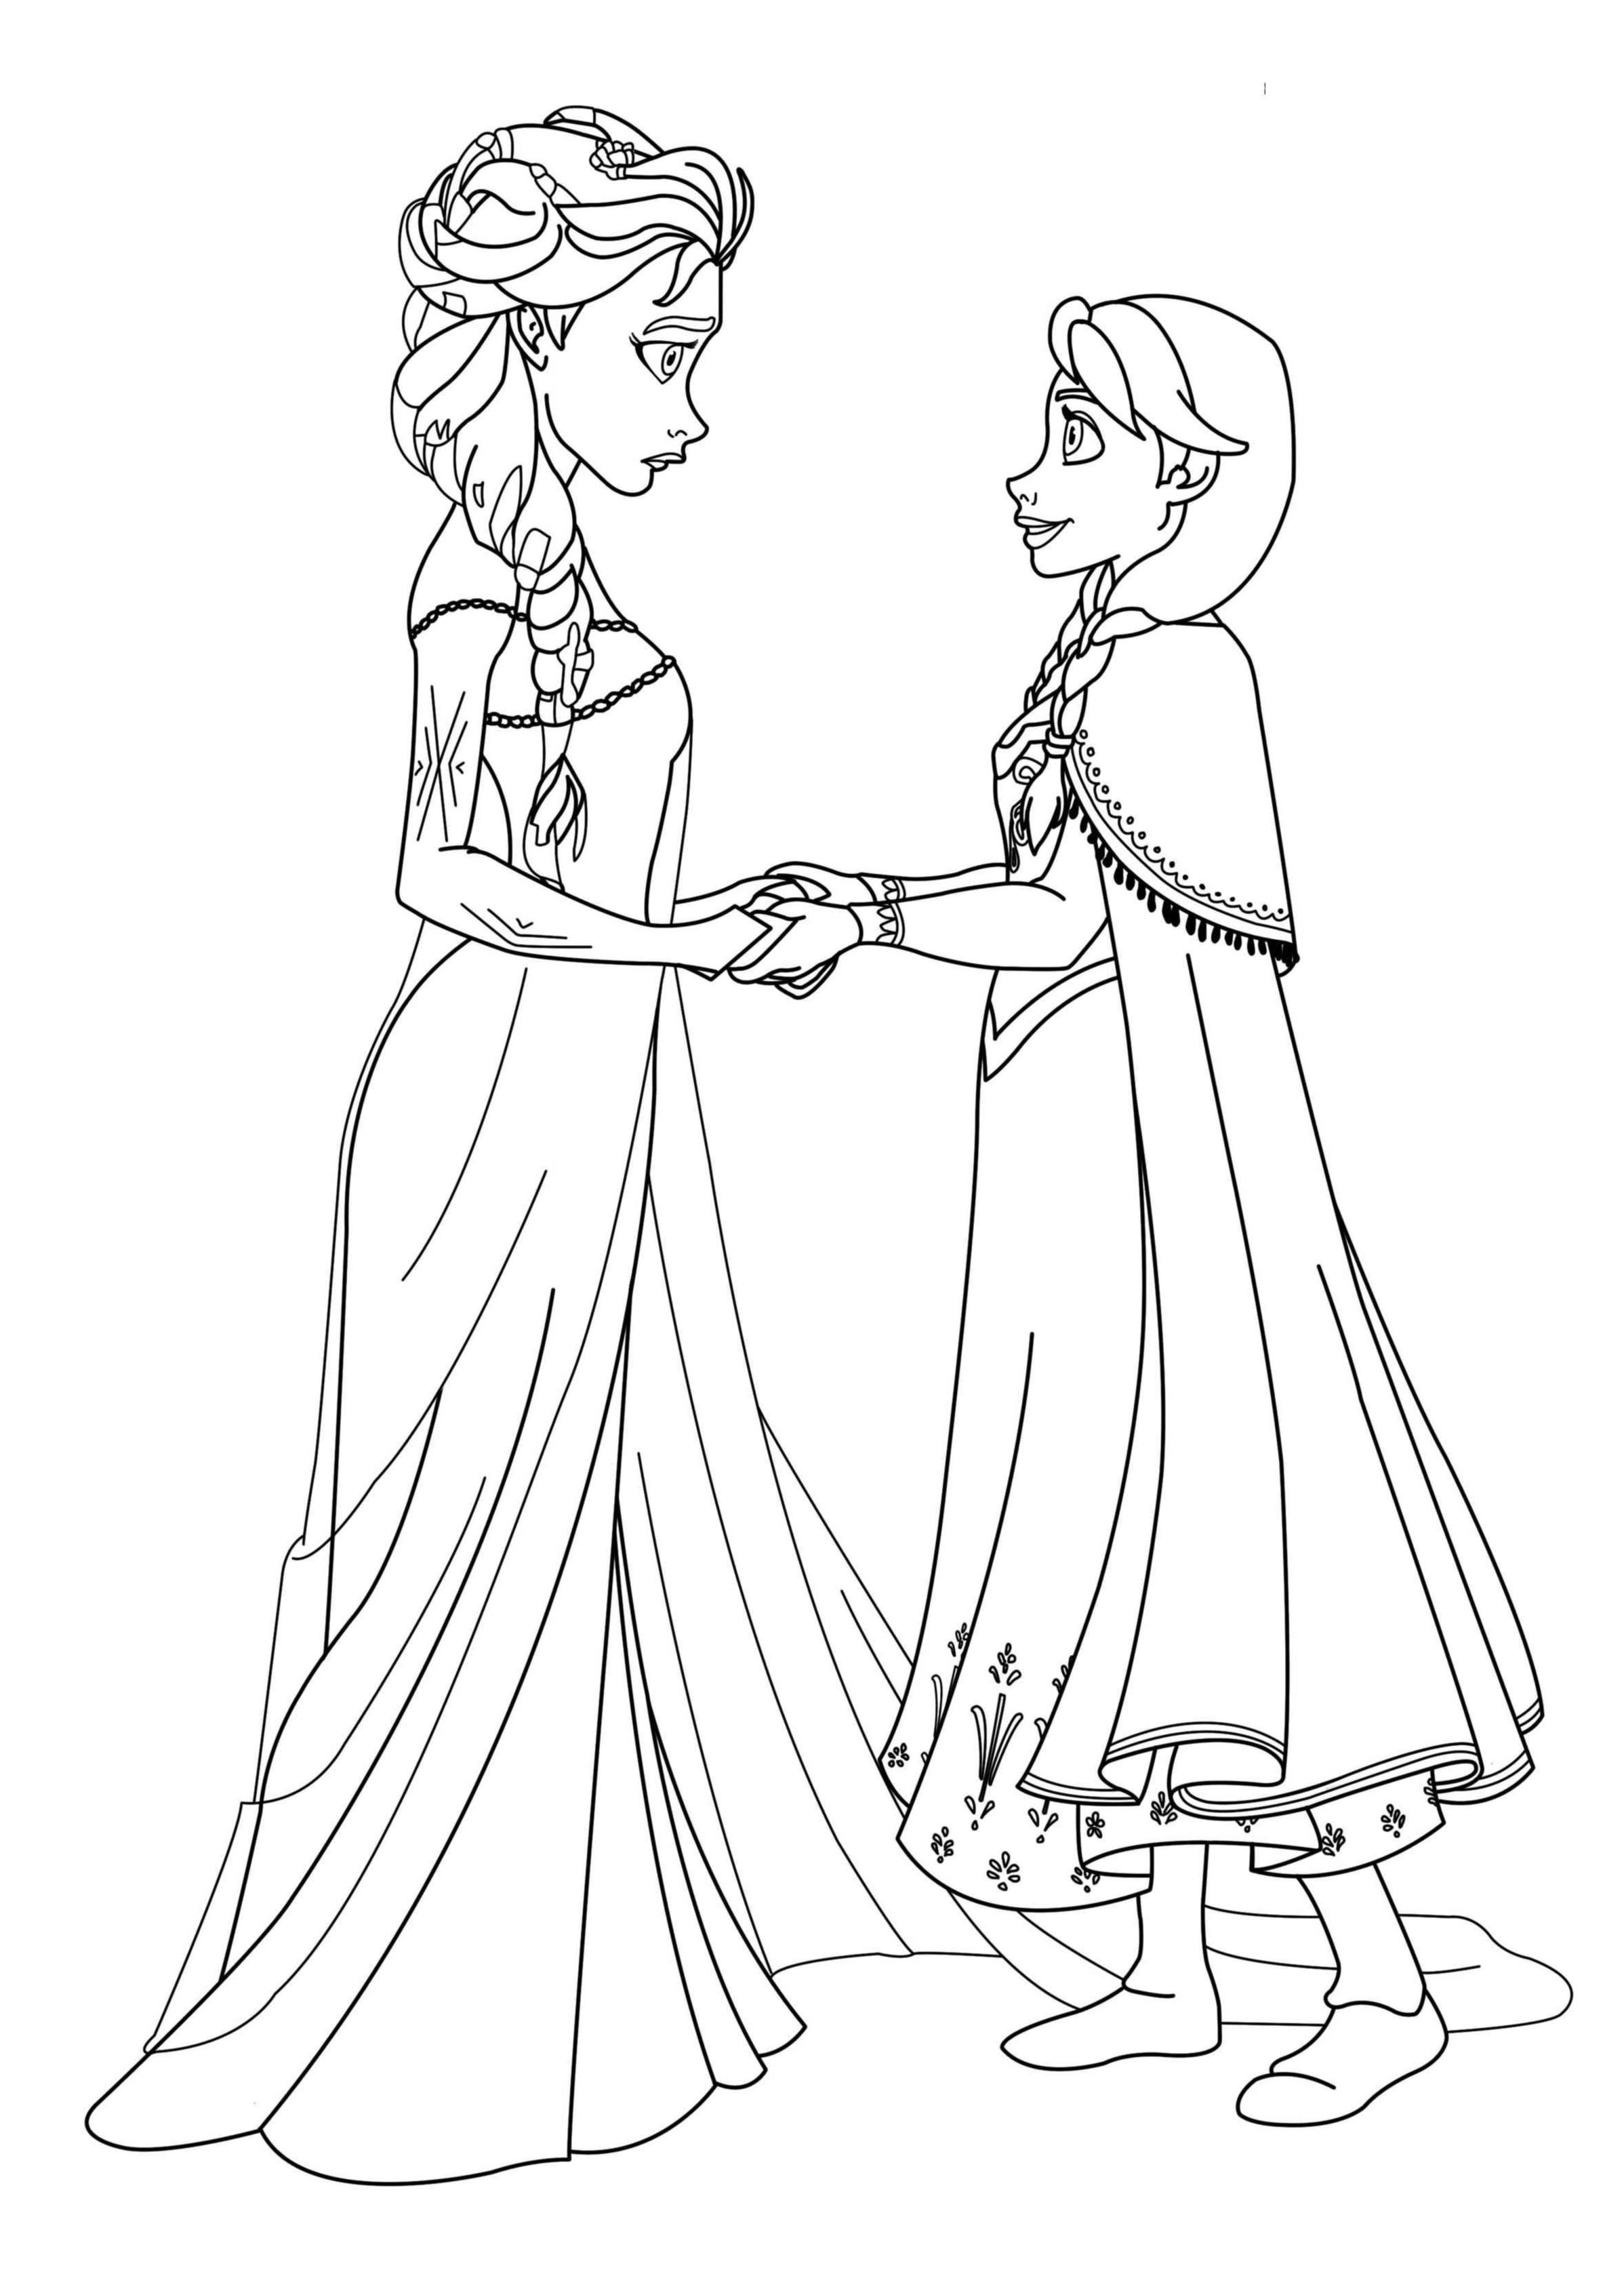 Download Frozen free to color for children - Frozen Kids Coloring Pages